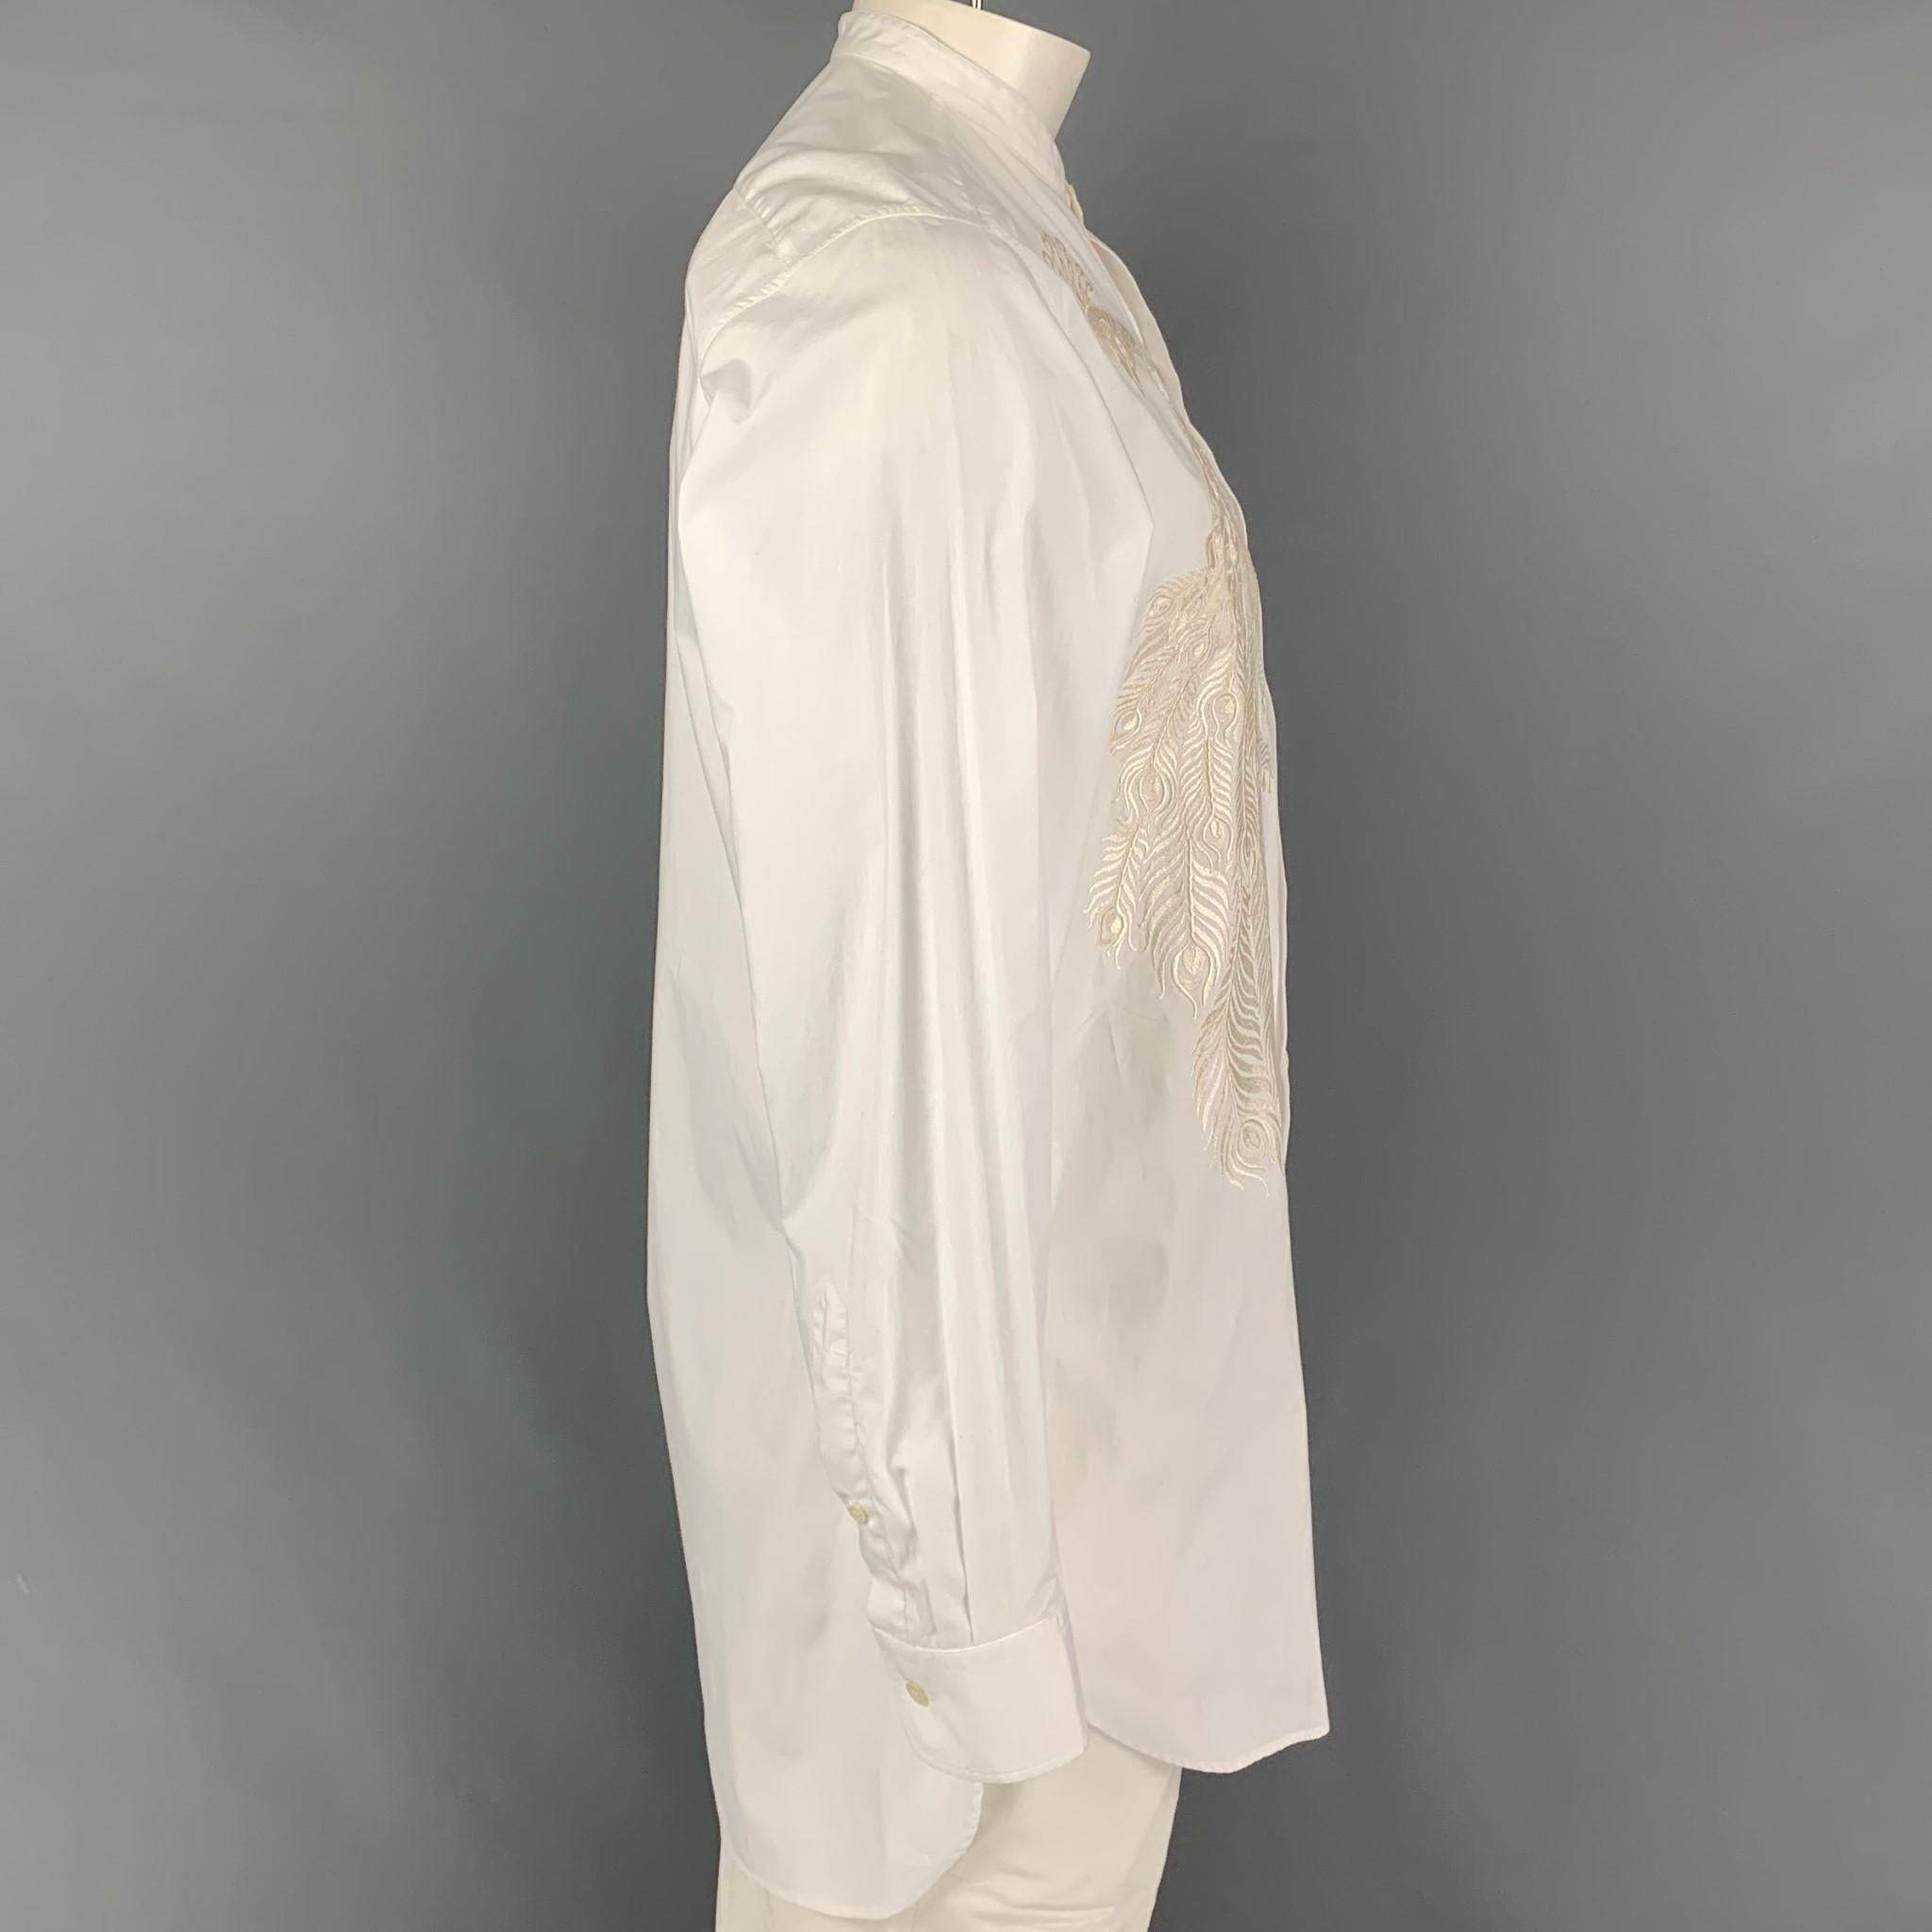 DRIES VAN NOTEN FW 16 long sleeve shirt comes in a white cotton featuring a nehru collar, front beige peacock embroidered design, and a button up closure. 

Very Good Pre-Owned Condition.
Marked: 50
Original Retail Price: